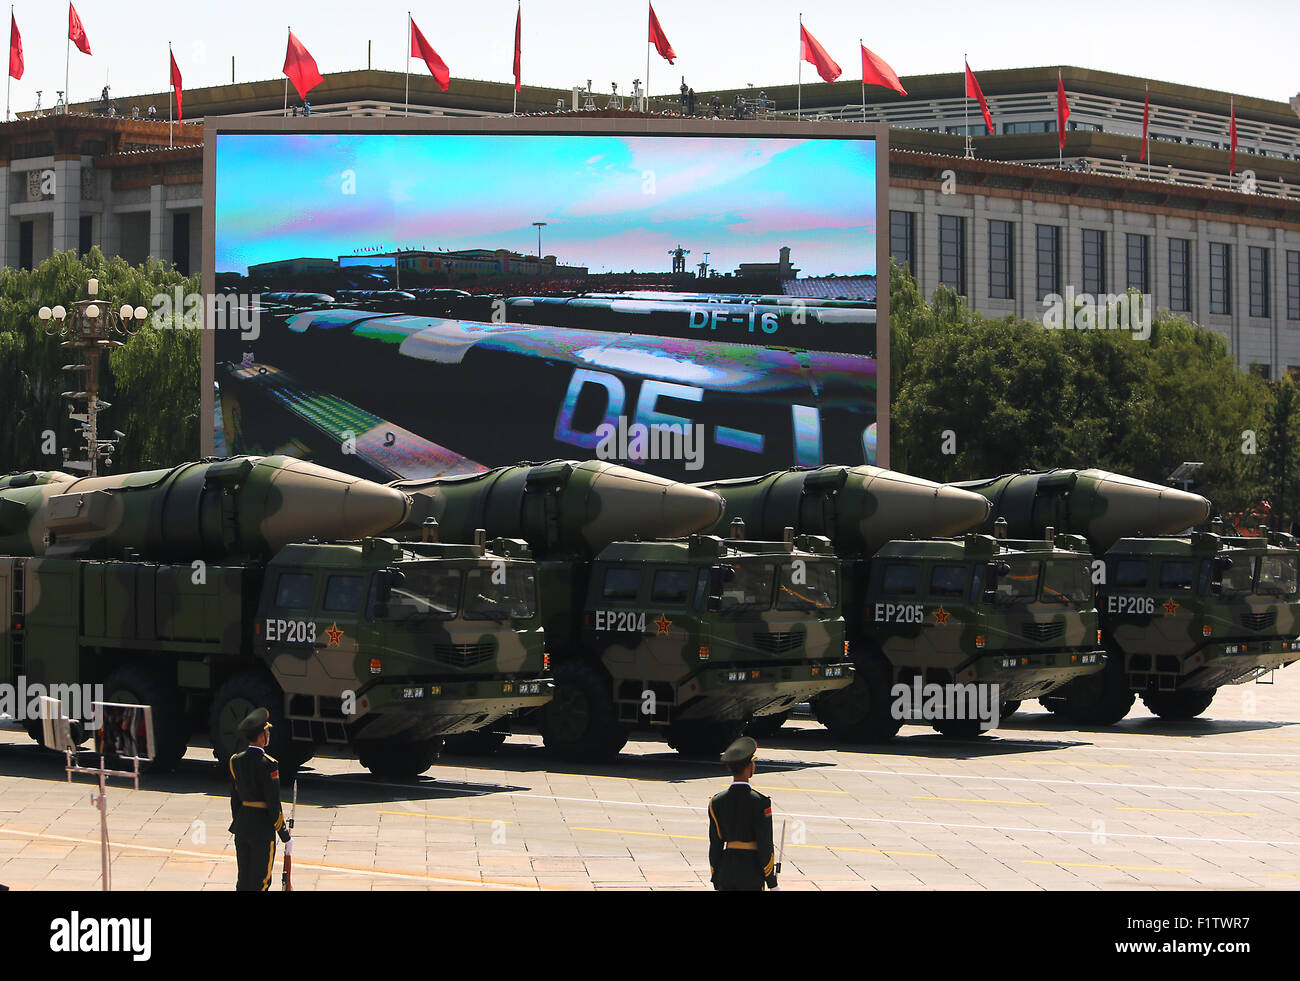 Sept. 3, 2015 - Beijing, CHINA - Over 12,000 soldiers and hundreds of tanks, ballistic missile launchers, amphibious assault vehicles, drones, fighter jets, helicopters and other military equipment participate in a massive parade marking the 70th anniversary of victory over Japan and the end of World War II in Beijing on September 3, 2015.  Presiding over the extravaganza, President Xi Jinping, China's most powerful leader in decades, said that China would remain committed to ''the path of peaceful development'' and unexpectedly vowed to cut 300,000 troops from its 2.3-million strong military, Stock Photo